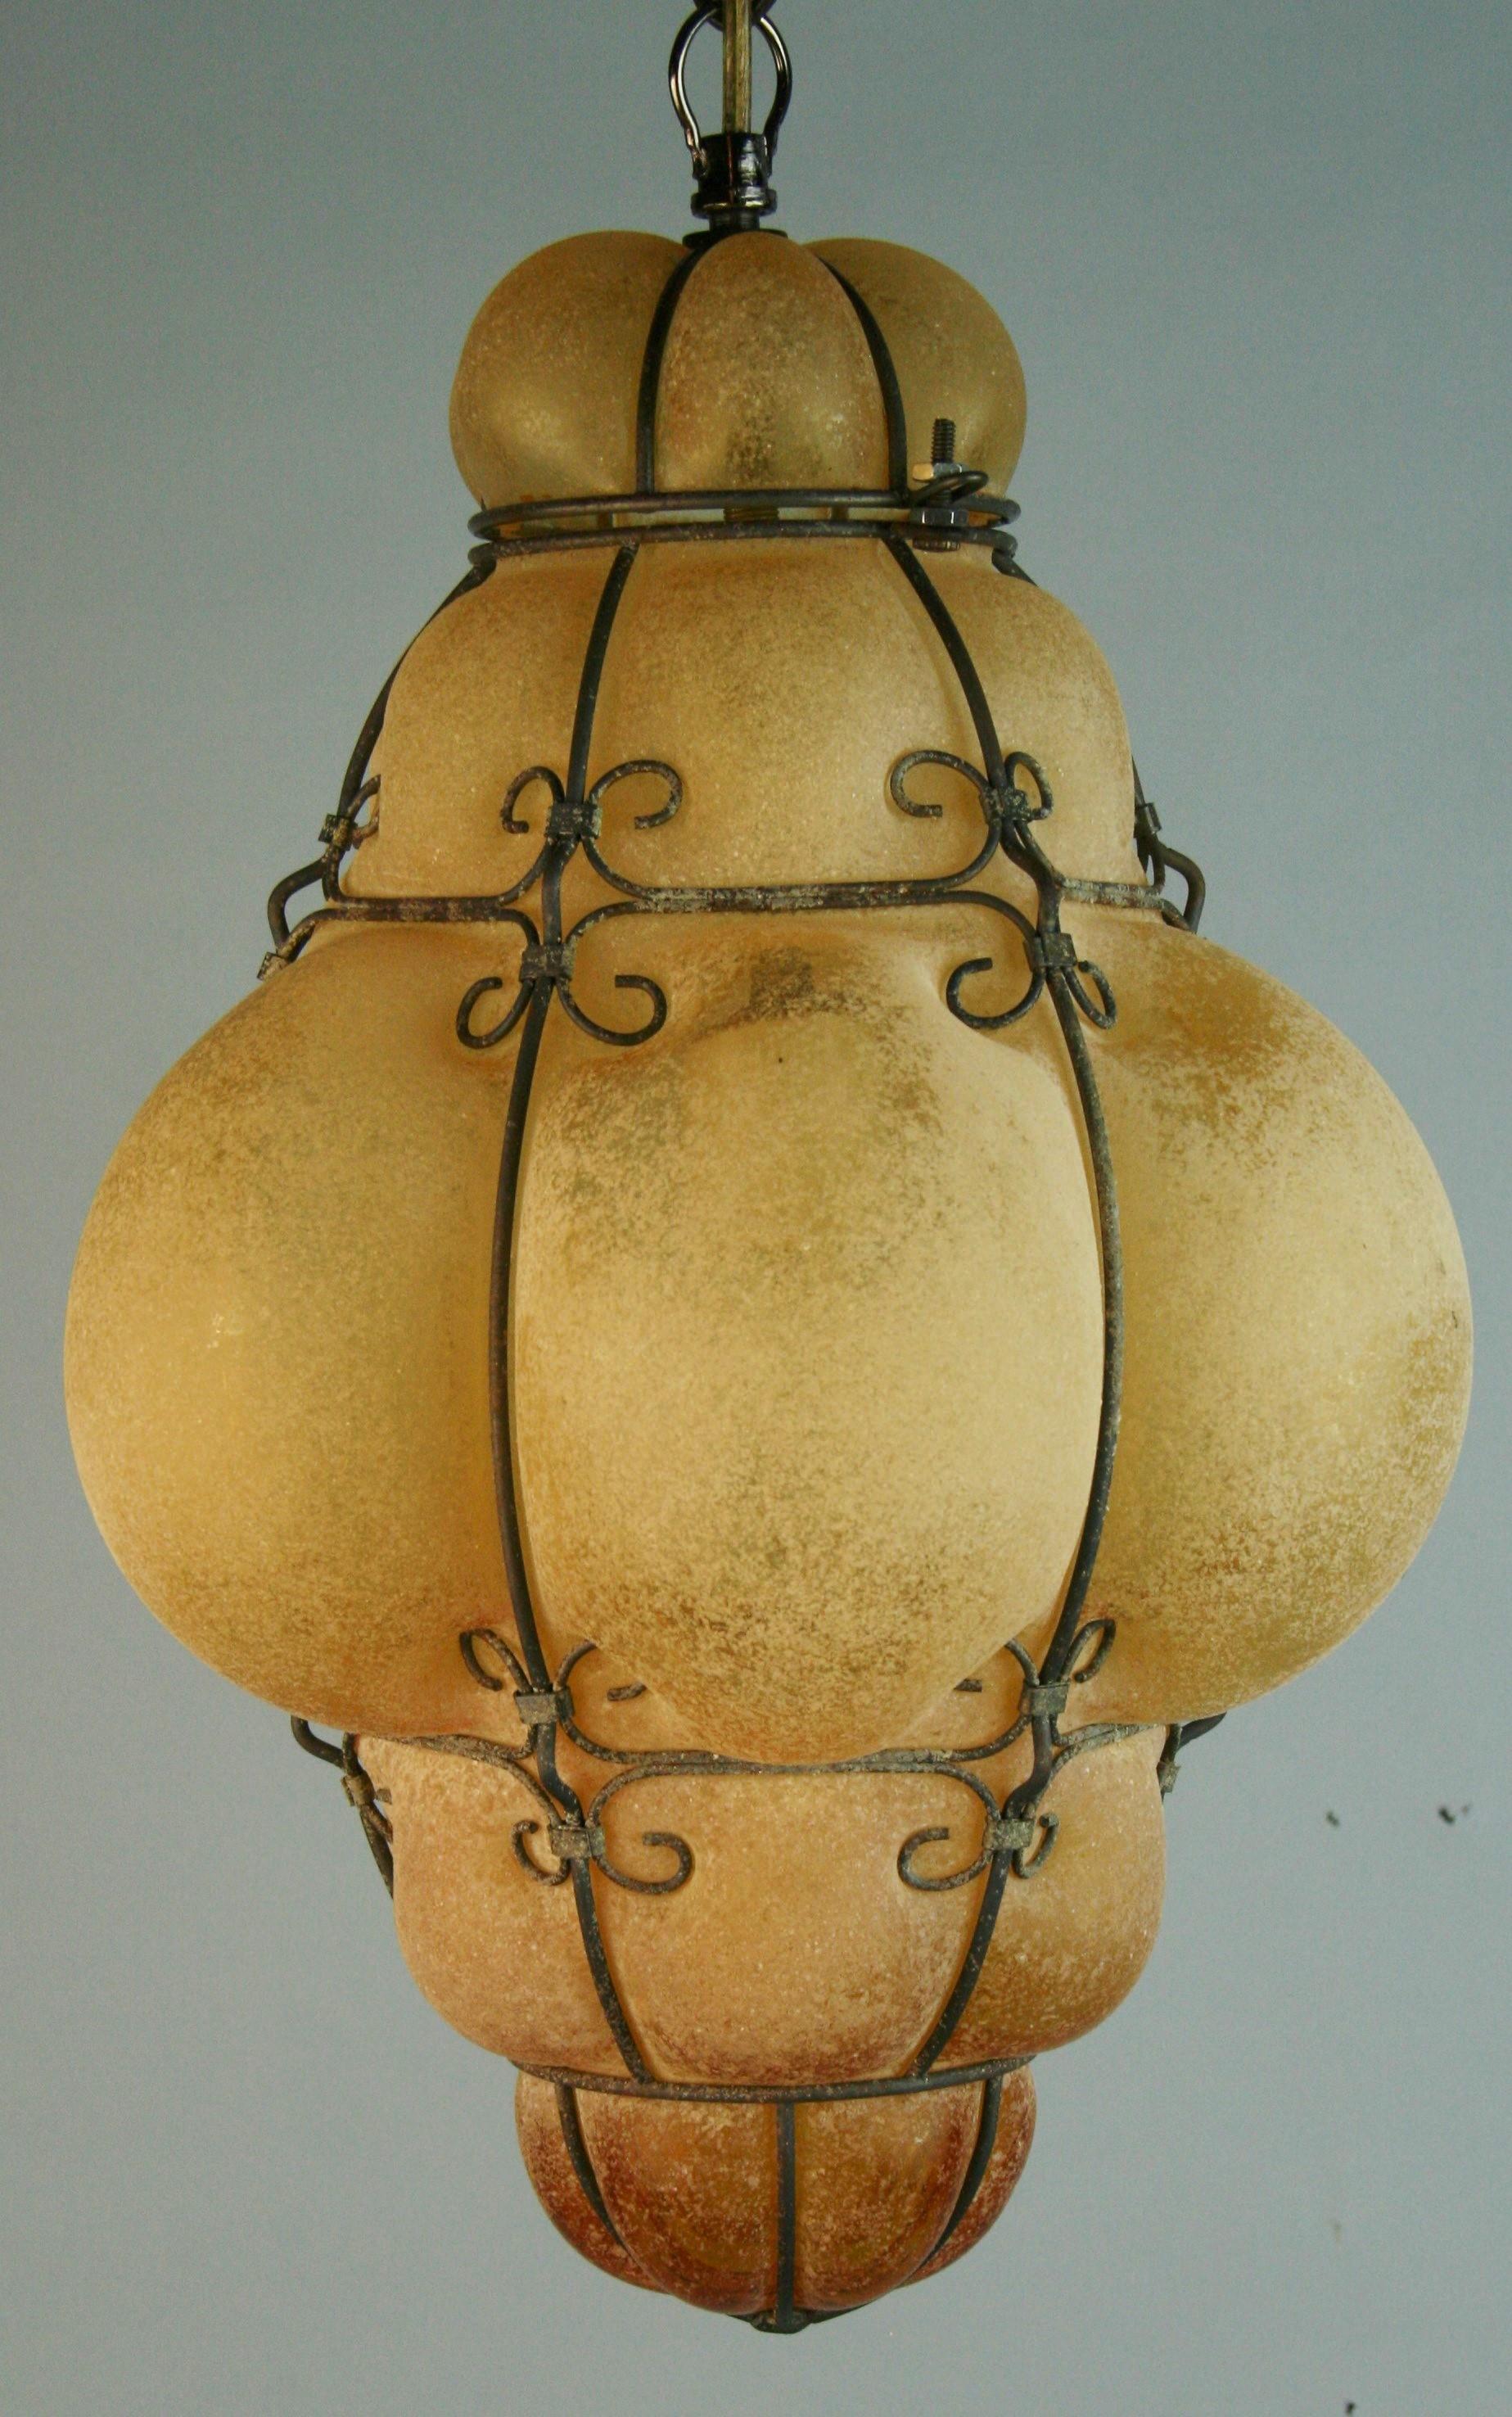 1298 Venetian amber glass pendant in wire cage with sand imbedded finish
2 available priced individually